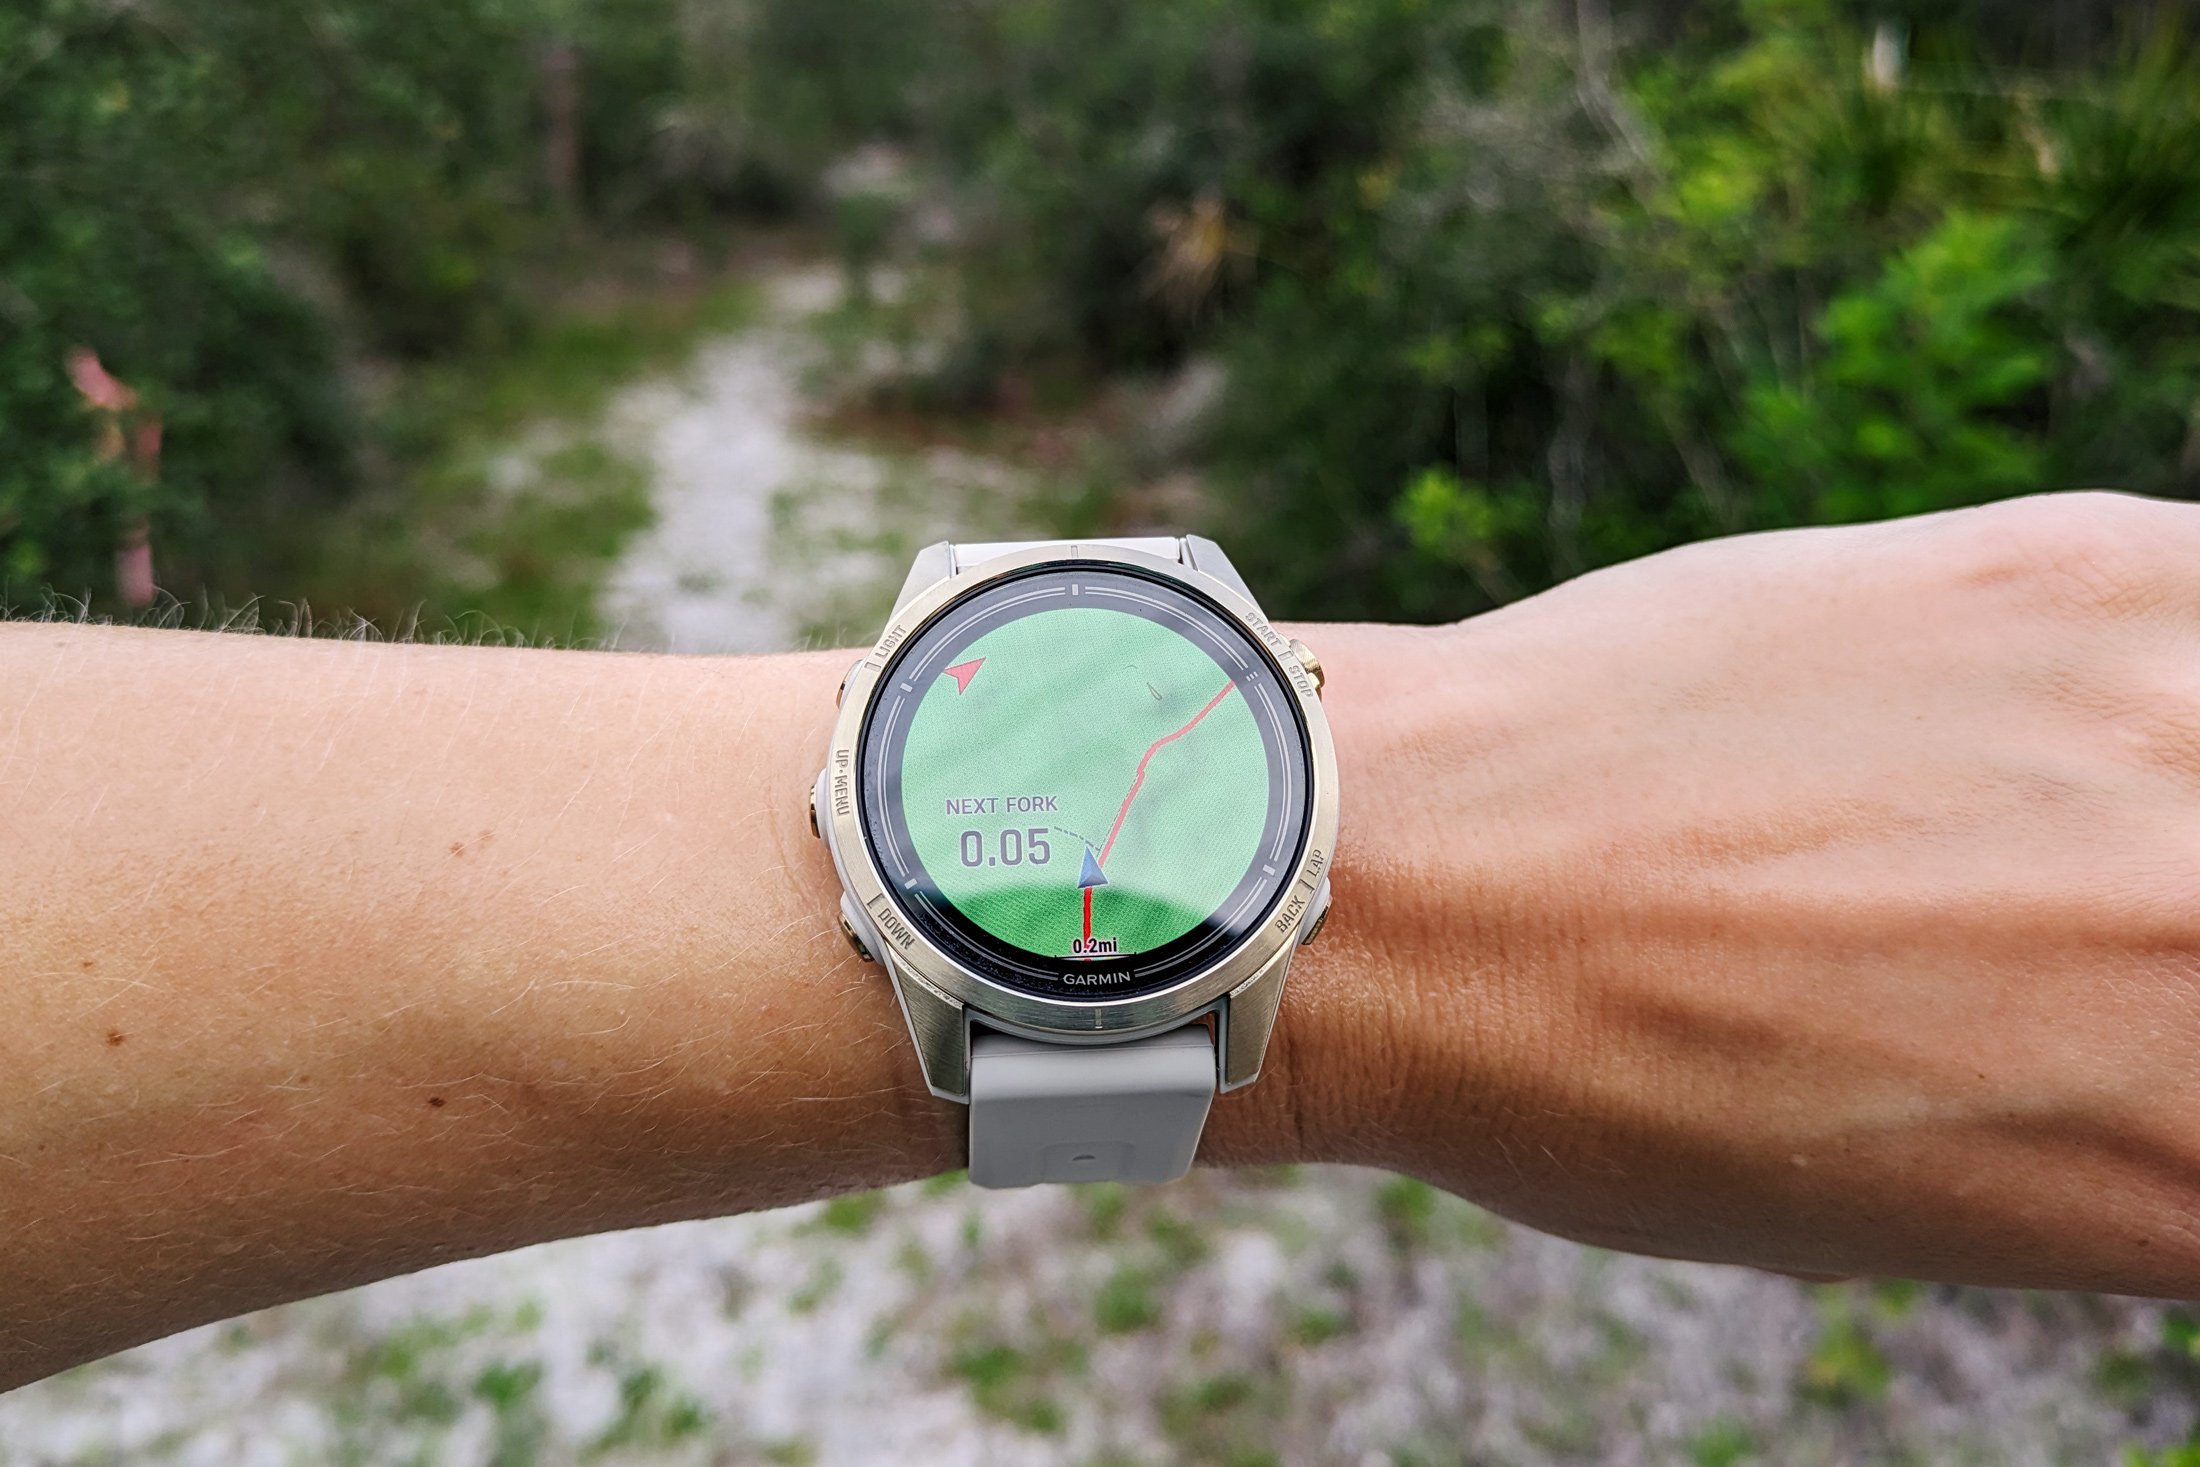 Garmin epix 2 Pro on a wrist in front of a trail through a forest